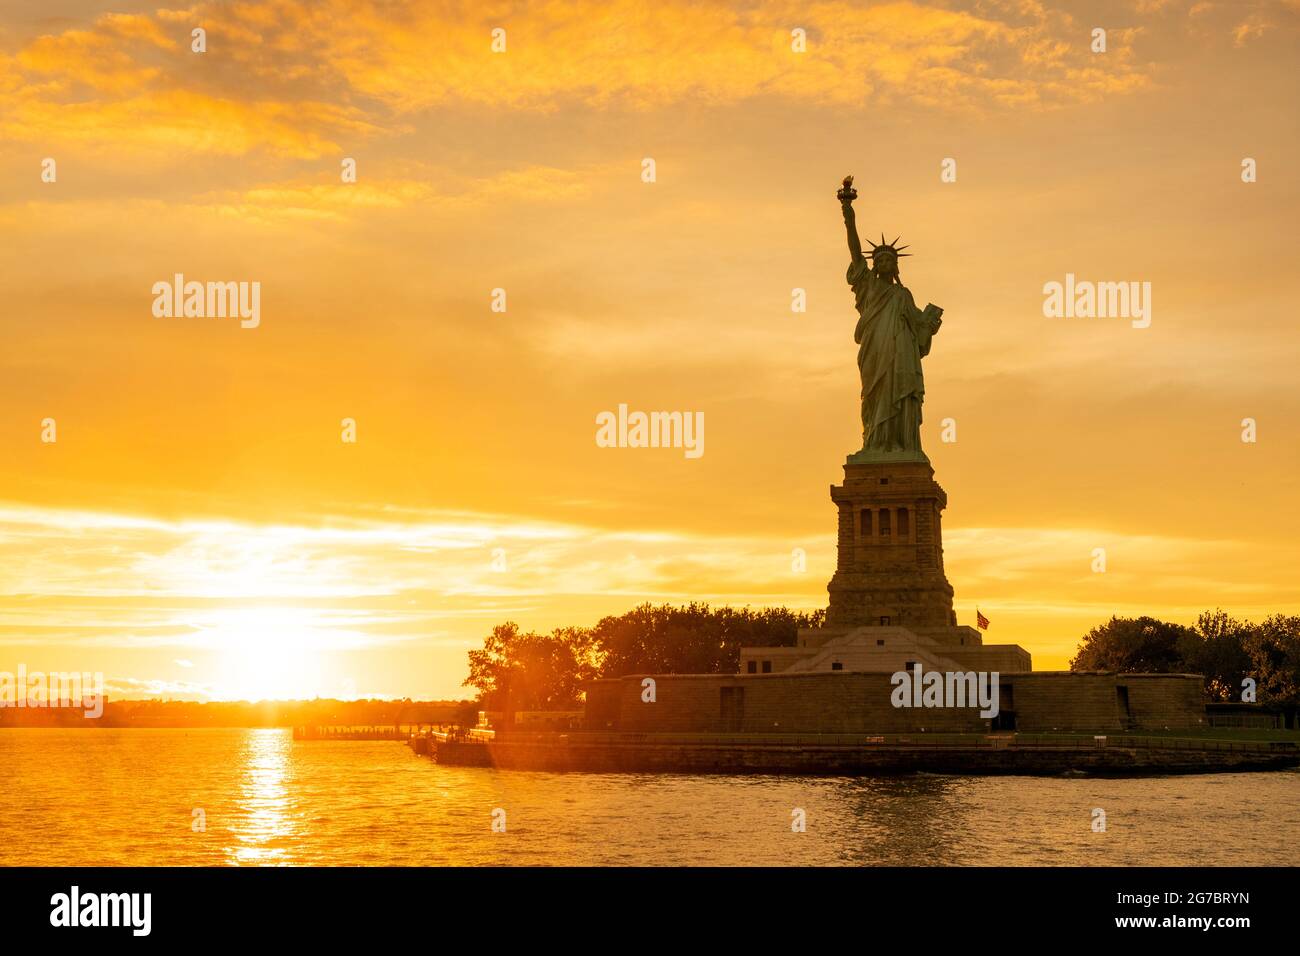 The Statue of Liberty at New York city during sunset Stock Photo